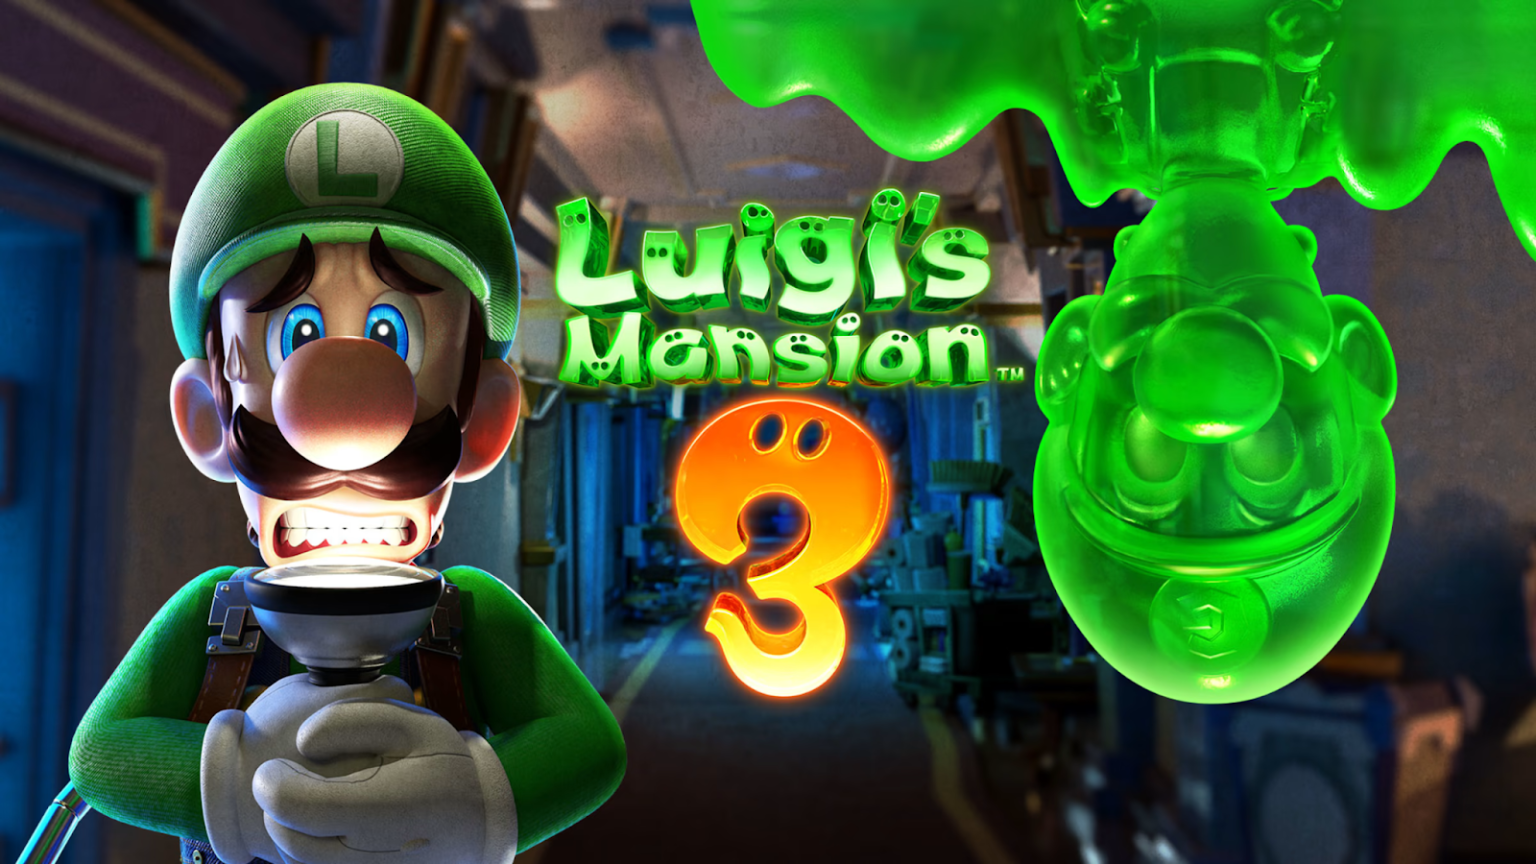 Luigi’s Mansion 3 Thorny Bathroom: How to Clear the Thorns From the Toilet